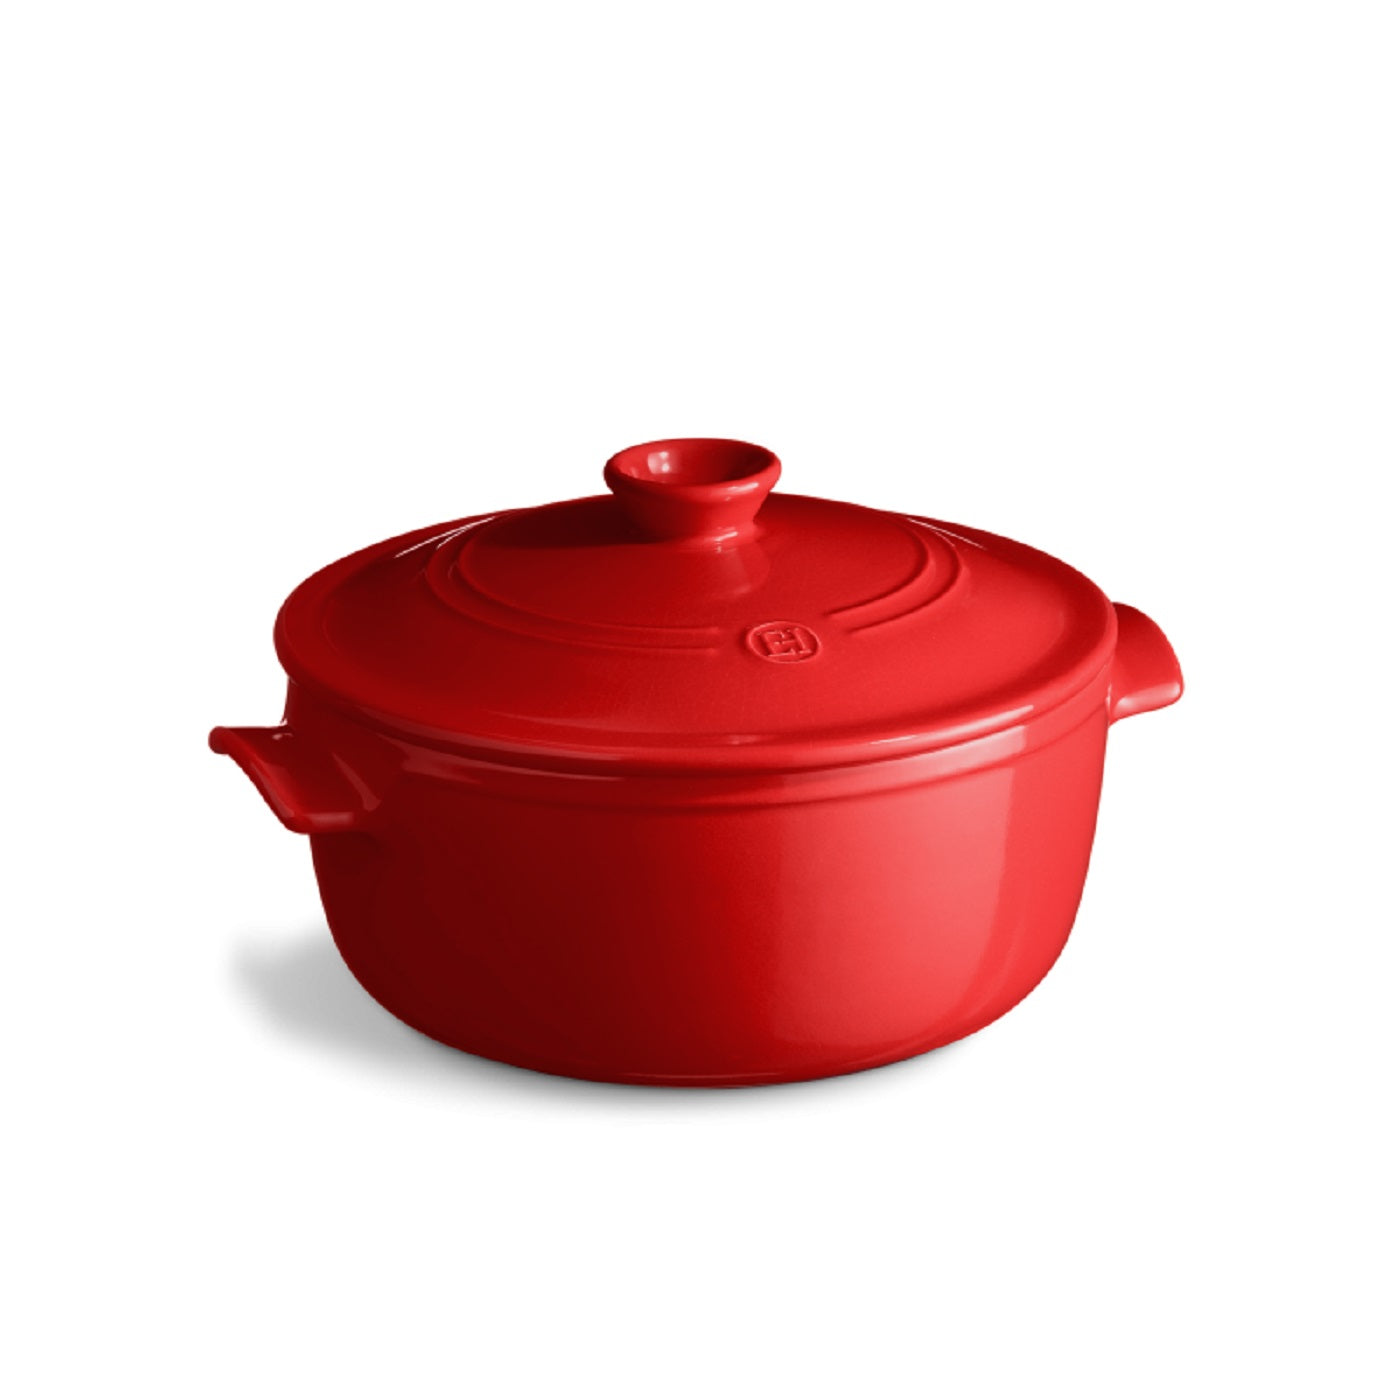 Emile Henry Round Cocotte 20 cm, Red